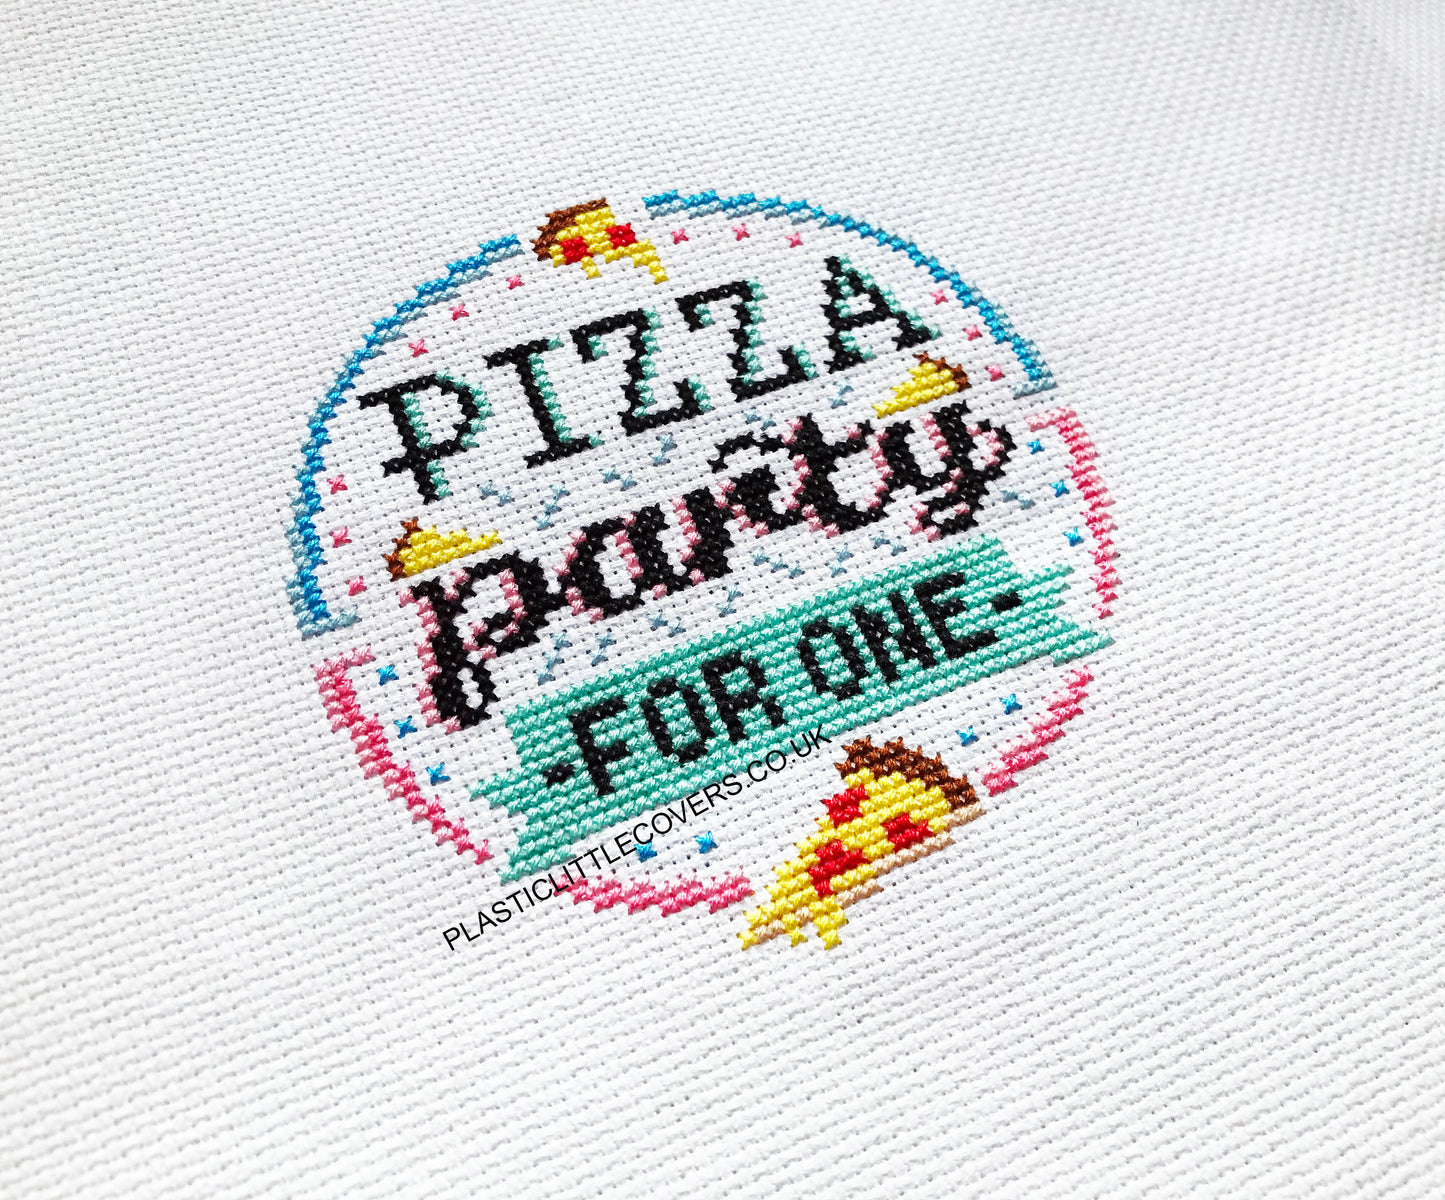 Cross Stitch Kit - Pizza Party for One.